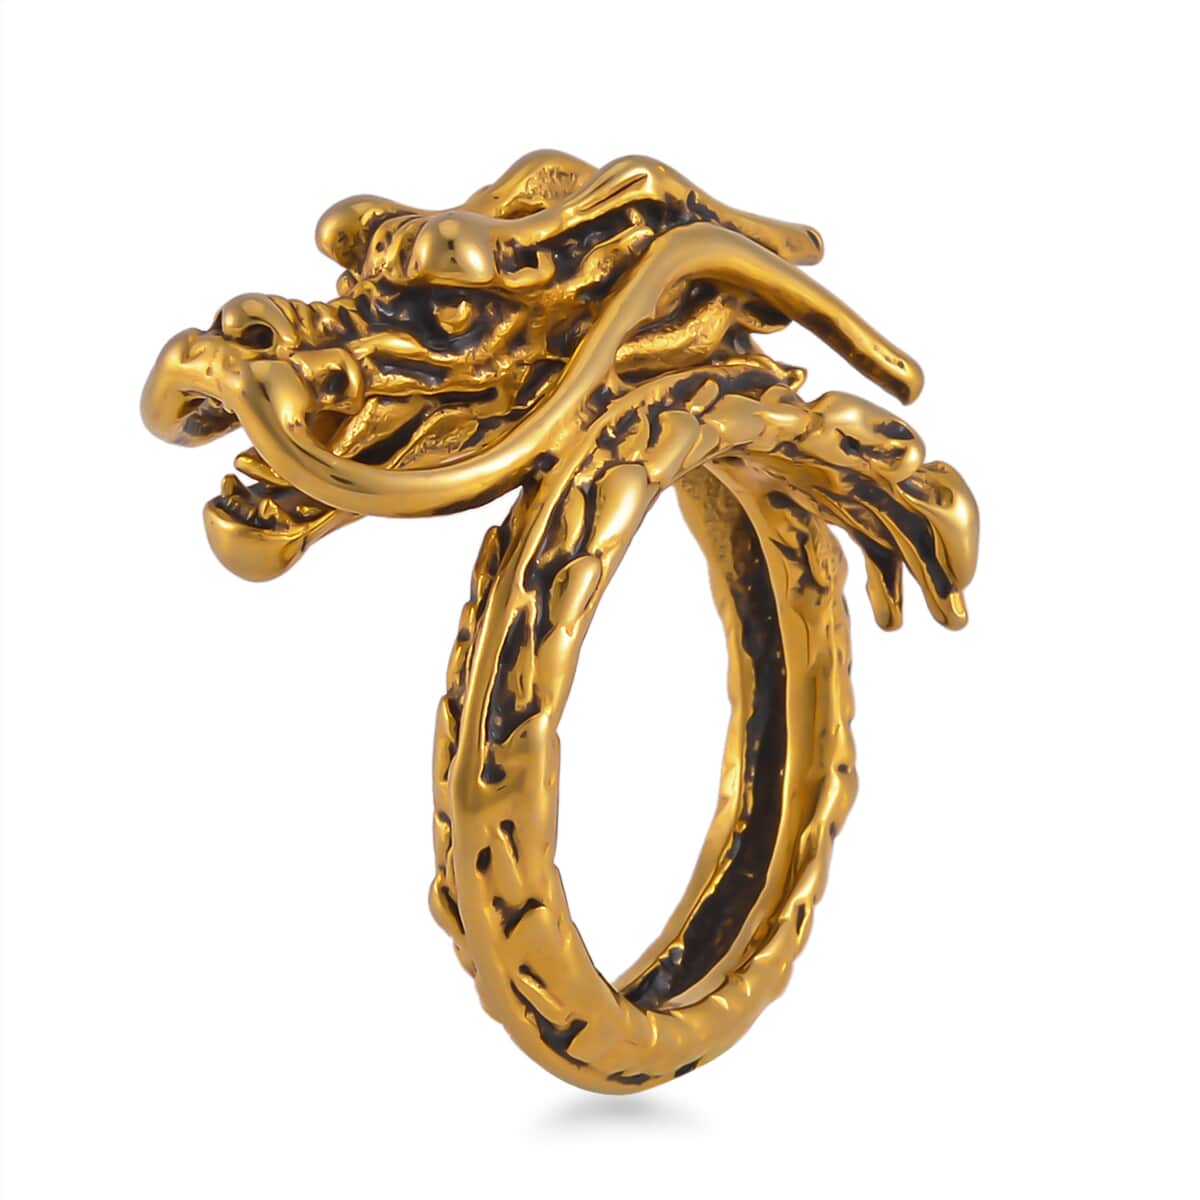 Dragon Men's Ring in ION Plated YG Stainless Steel (Size 11.0) image number 3